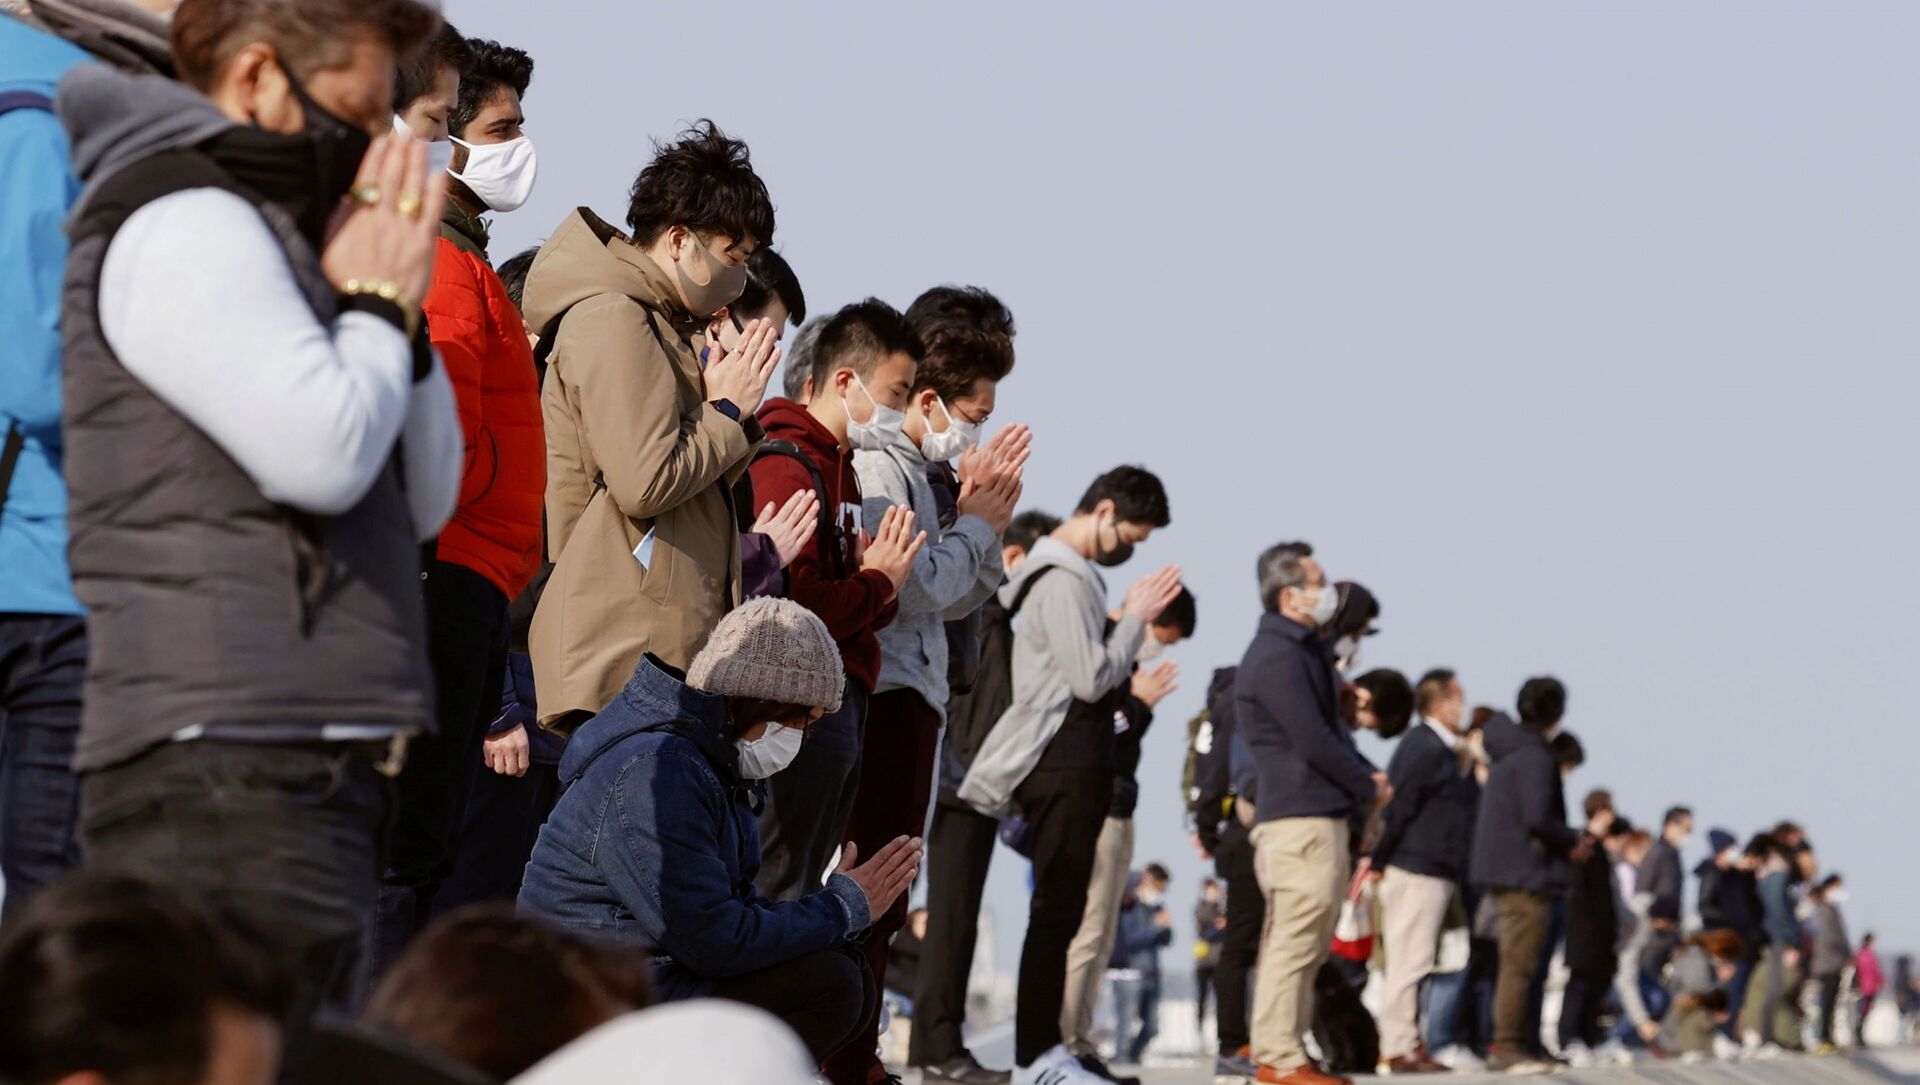 Participants pray and observe a moment of silence towards the sea at 2:46 p.m. (05:46 GMT), the time when the 9.0-magnitude earthquake struck off Japan's coast in 2011, at Arahama district in Sendai, northeastern Japan, March 11, 2021, to mark the 10-year anniversary of the 2011 earthquake and tsunami that killed thousands and set off a nuclear crisis - Sputnik International, 1920, 11.03.2021